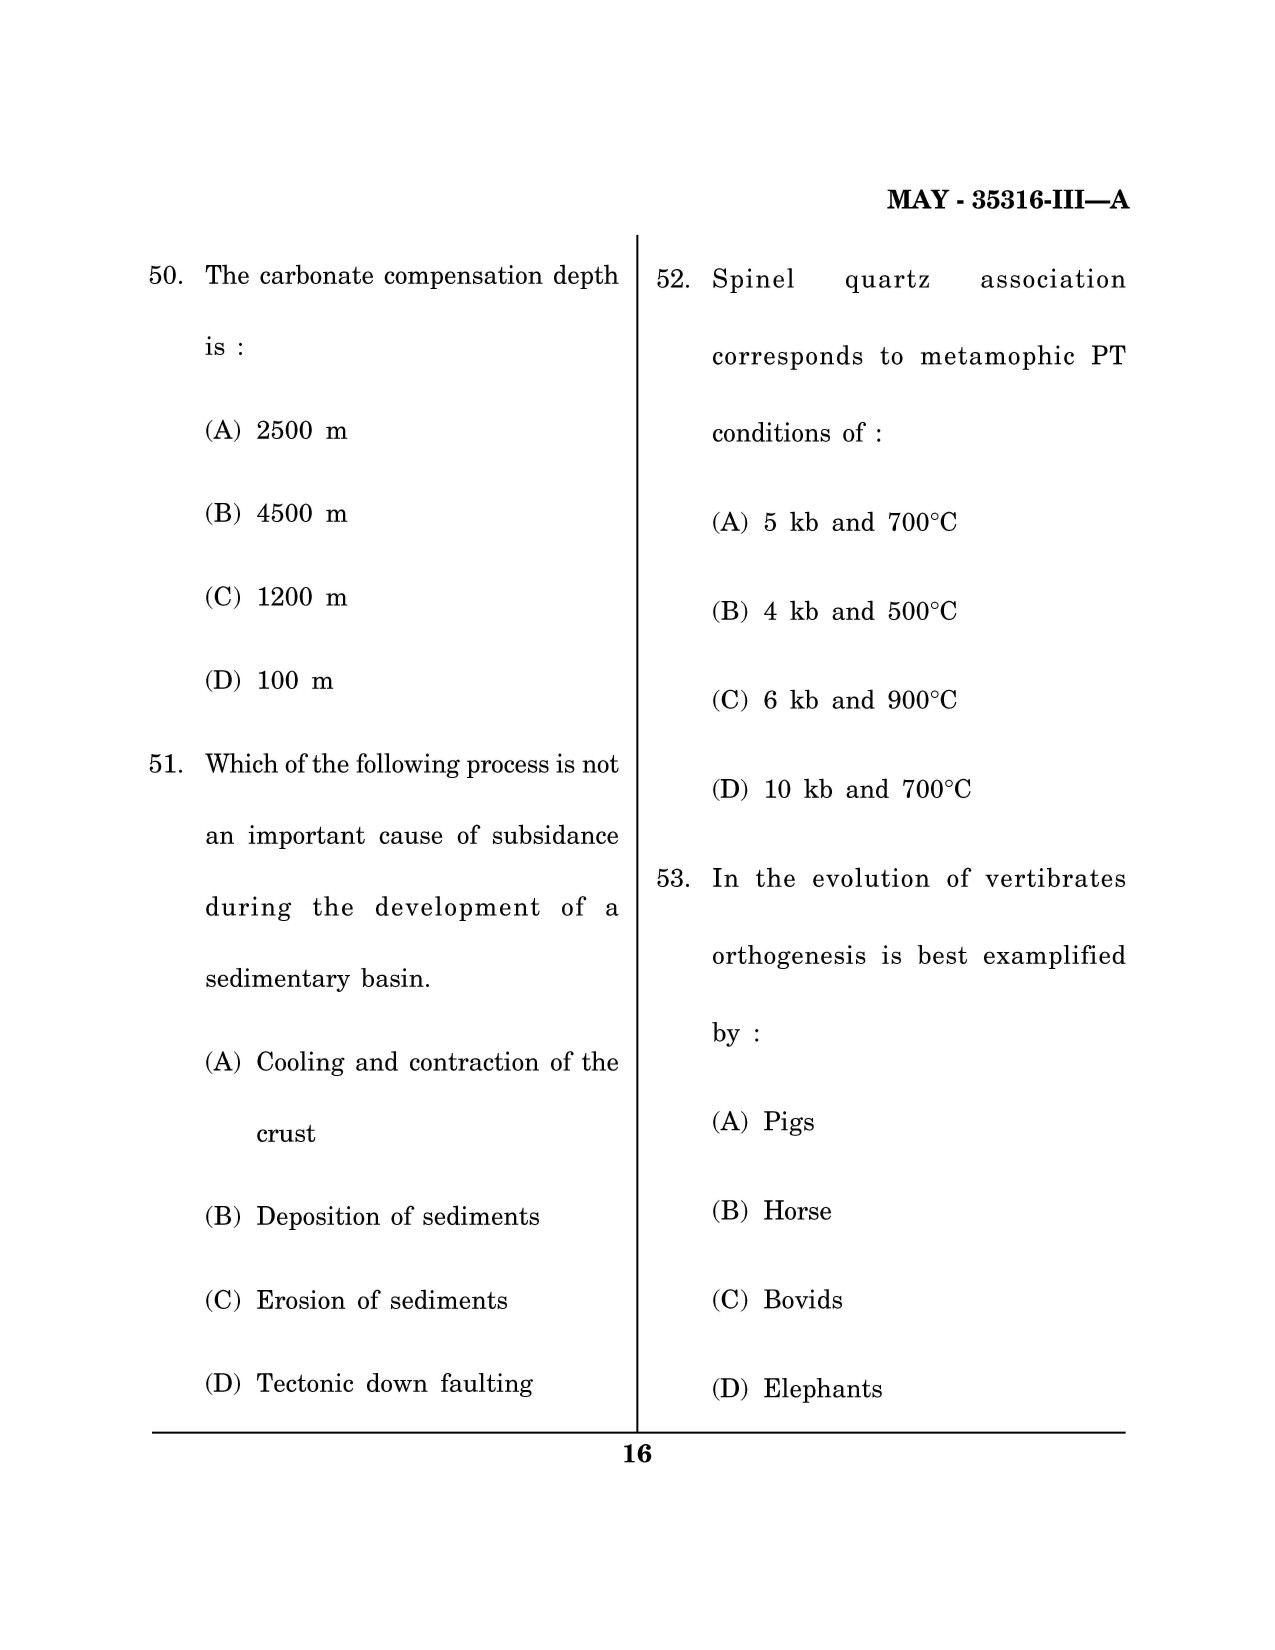 Maharashtra SET Earth Atmospheric Ocean Planetary Science Question Paper III May 2016 15